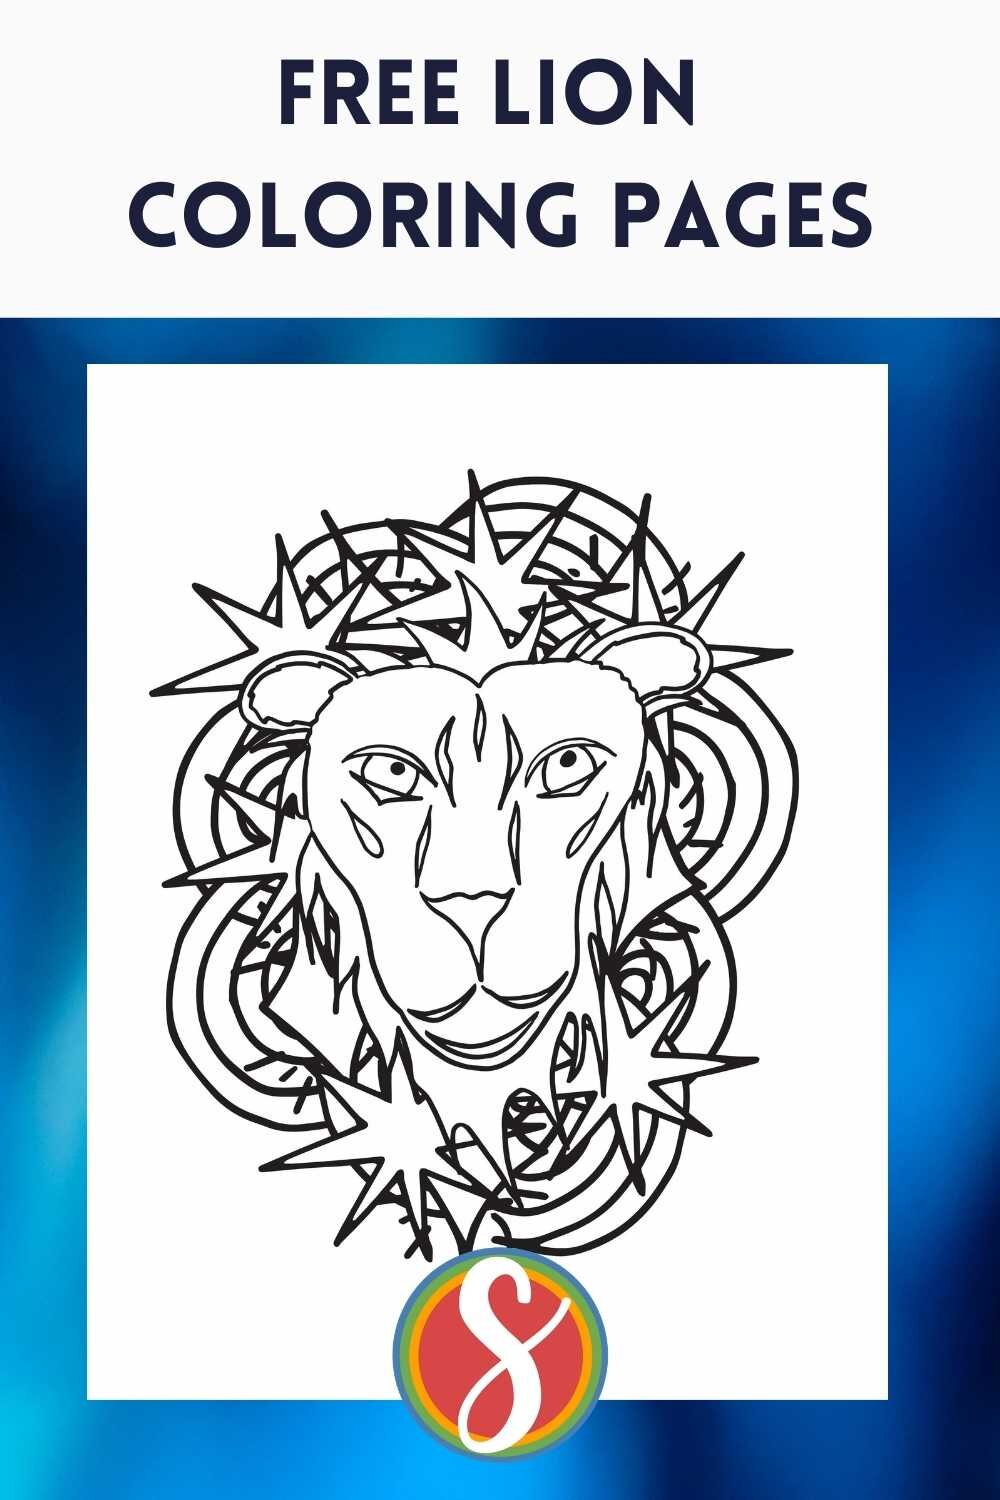 Free printable lion with stars and swirls - a unique and free coloring sheet to print and enjoy